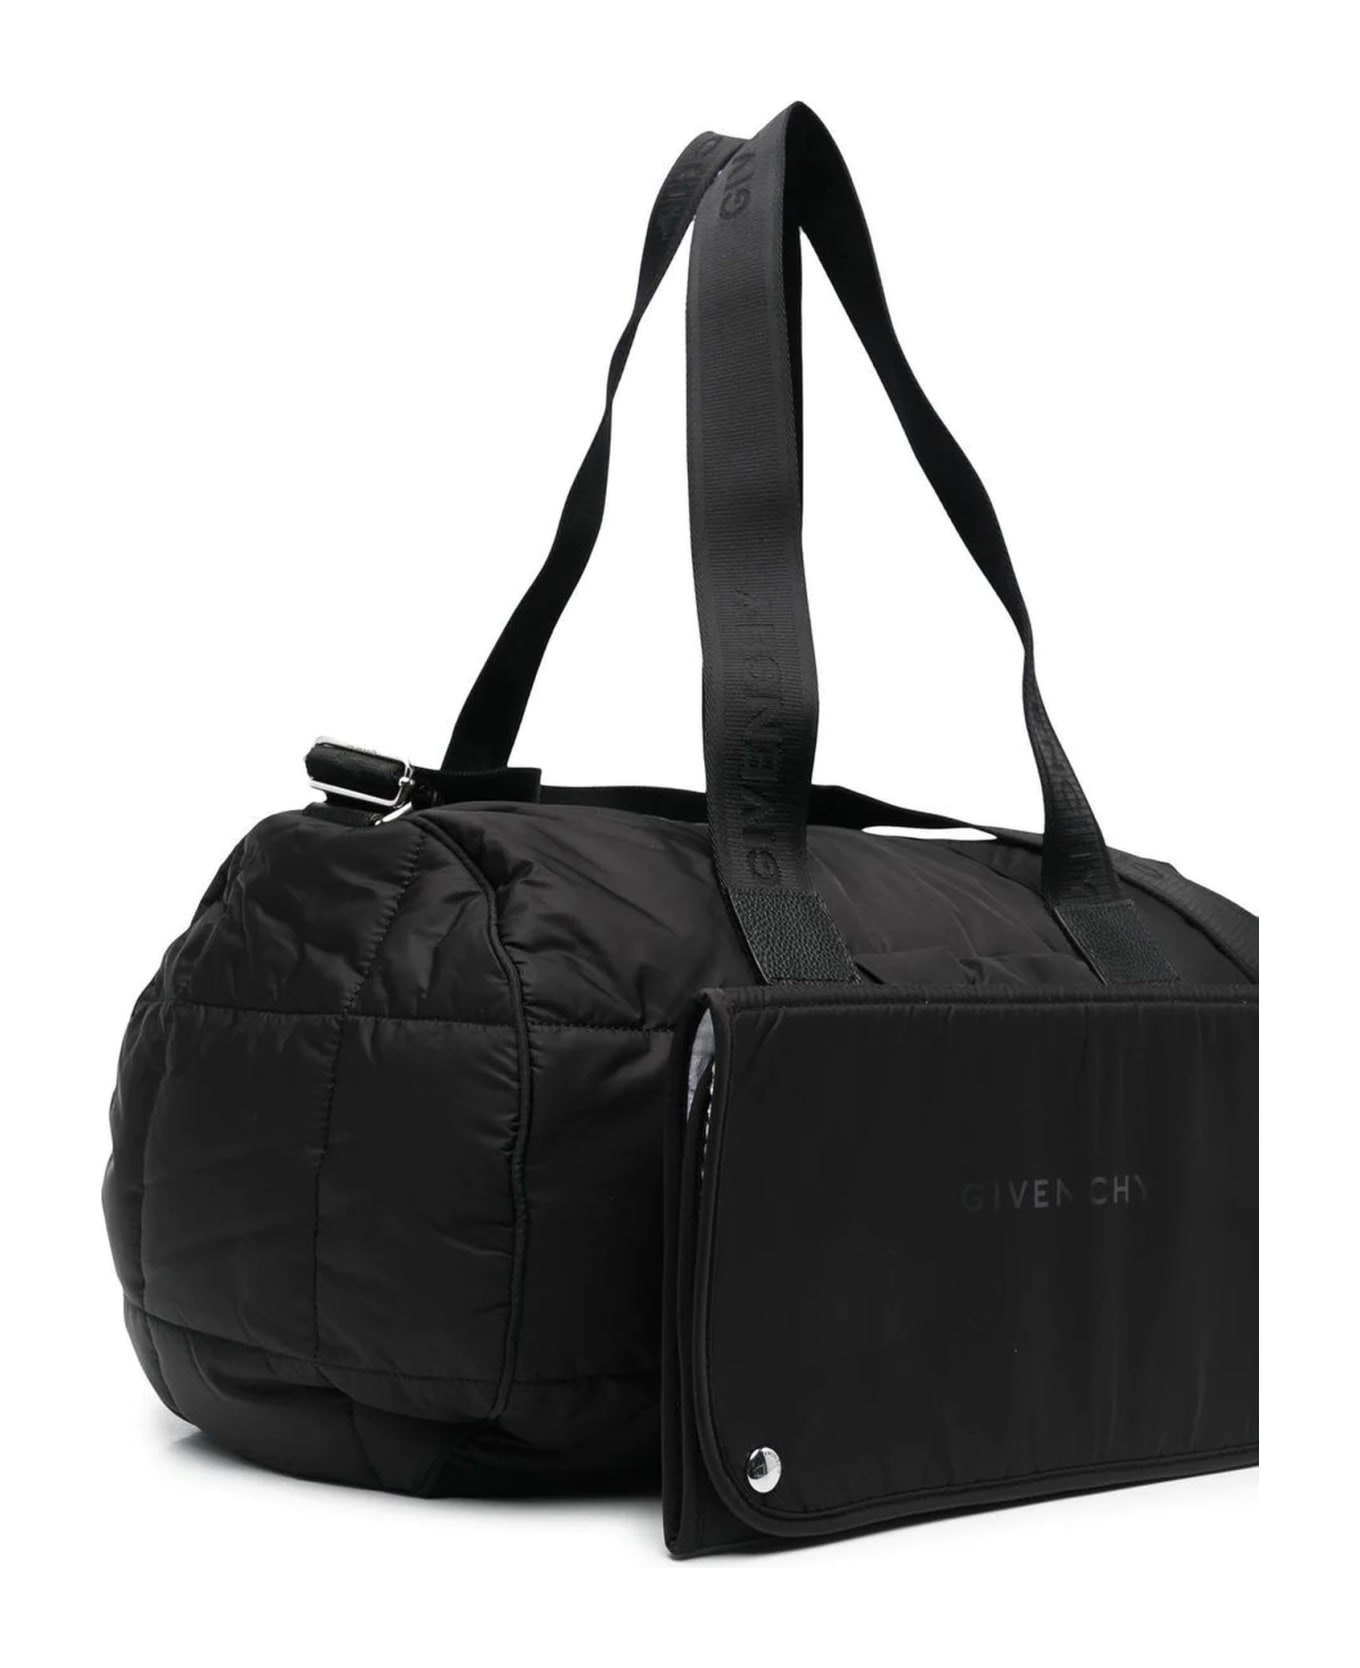 Givenchy Black Leather Bag Changing - Nero